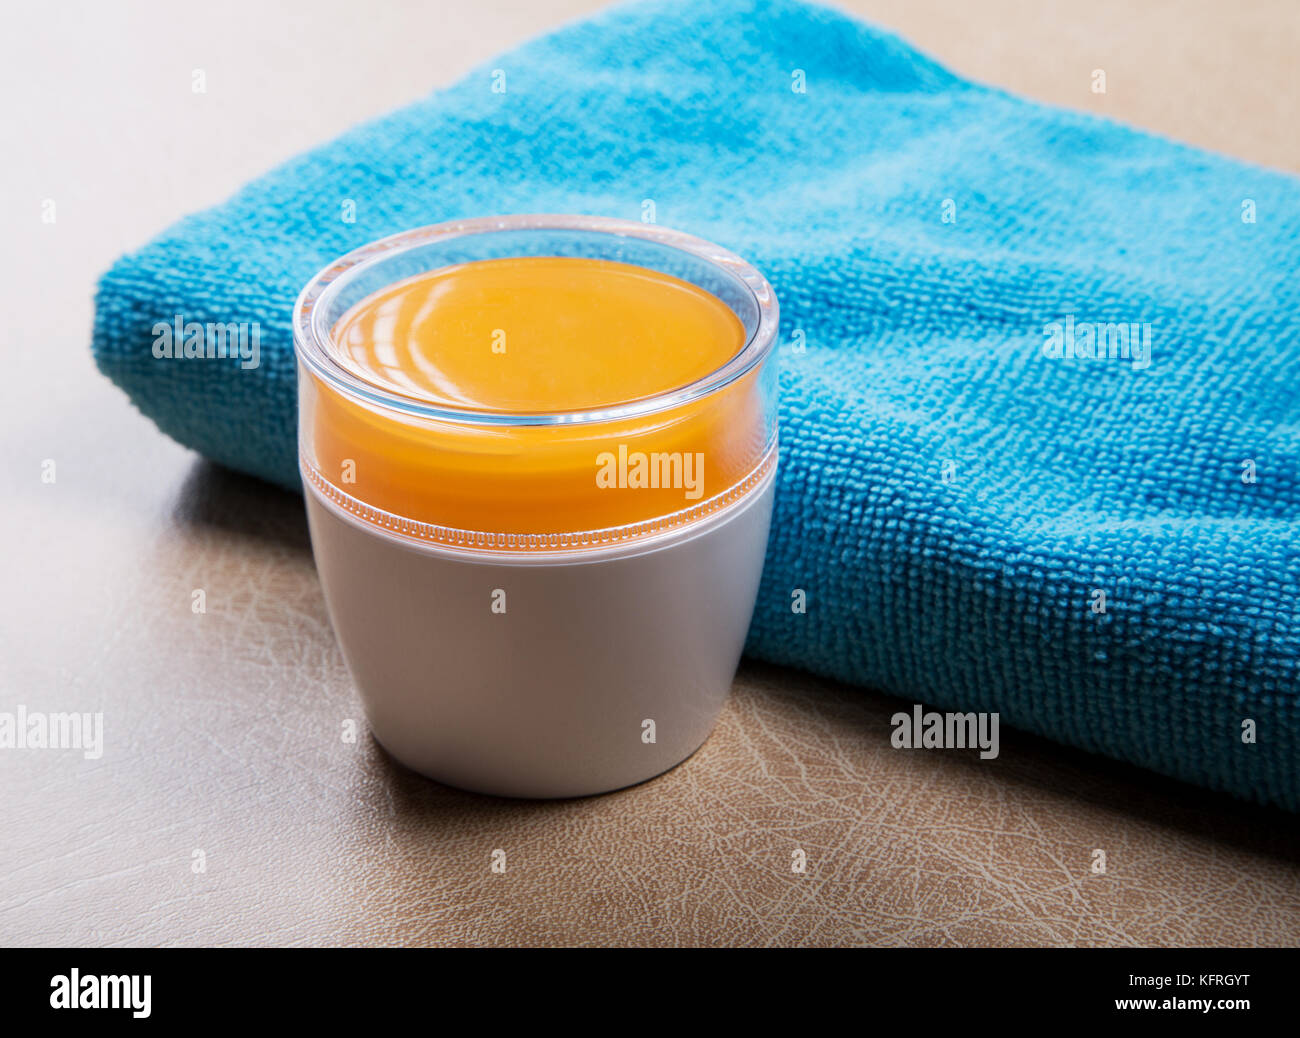 jar with cosmetic cream and a blue towel on the table Stock Photo